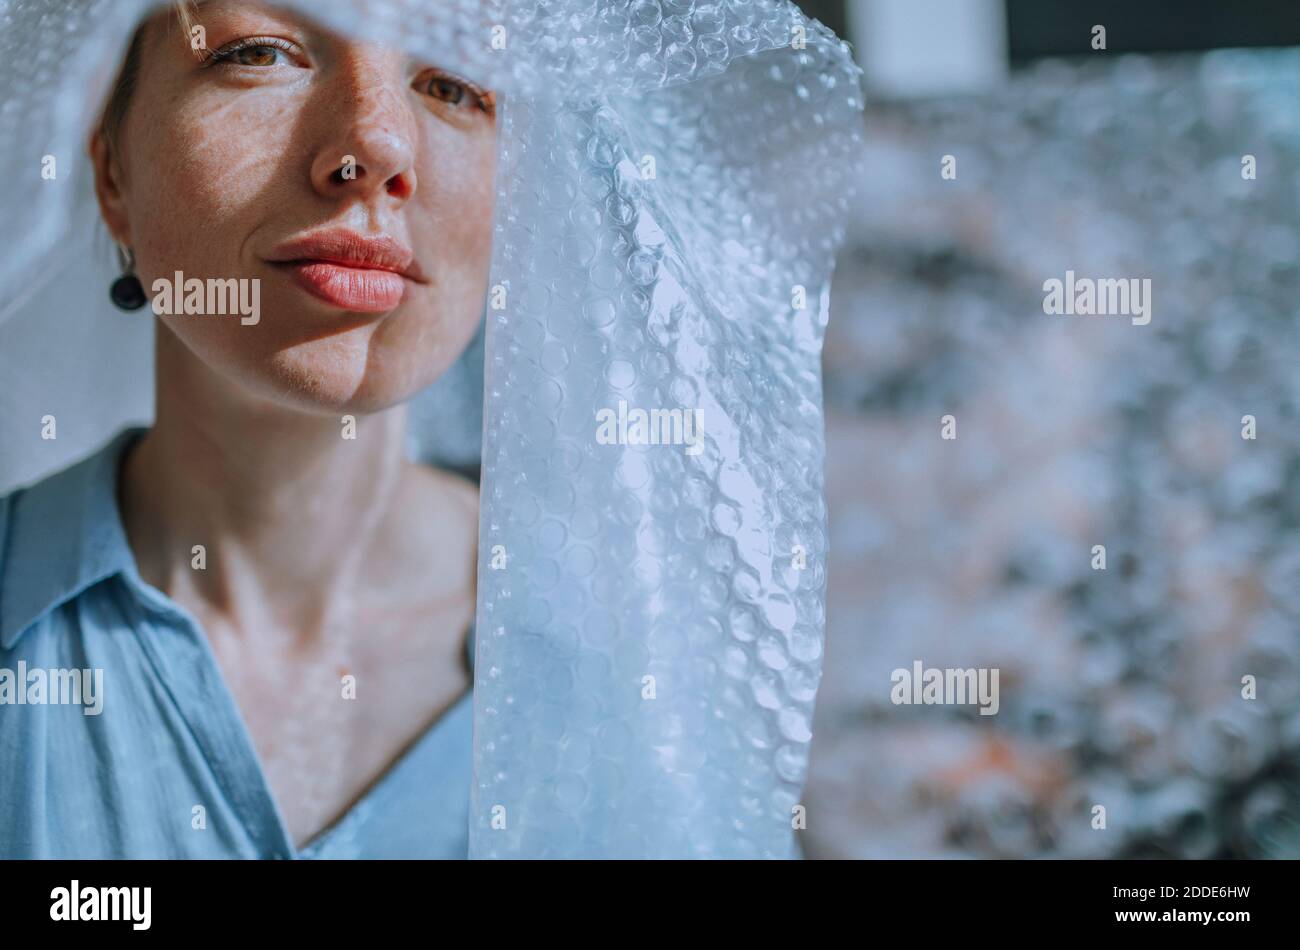 Female artist covered in bubble wrap at art studio Stock Photo